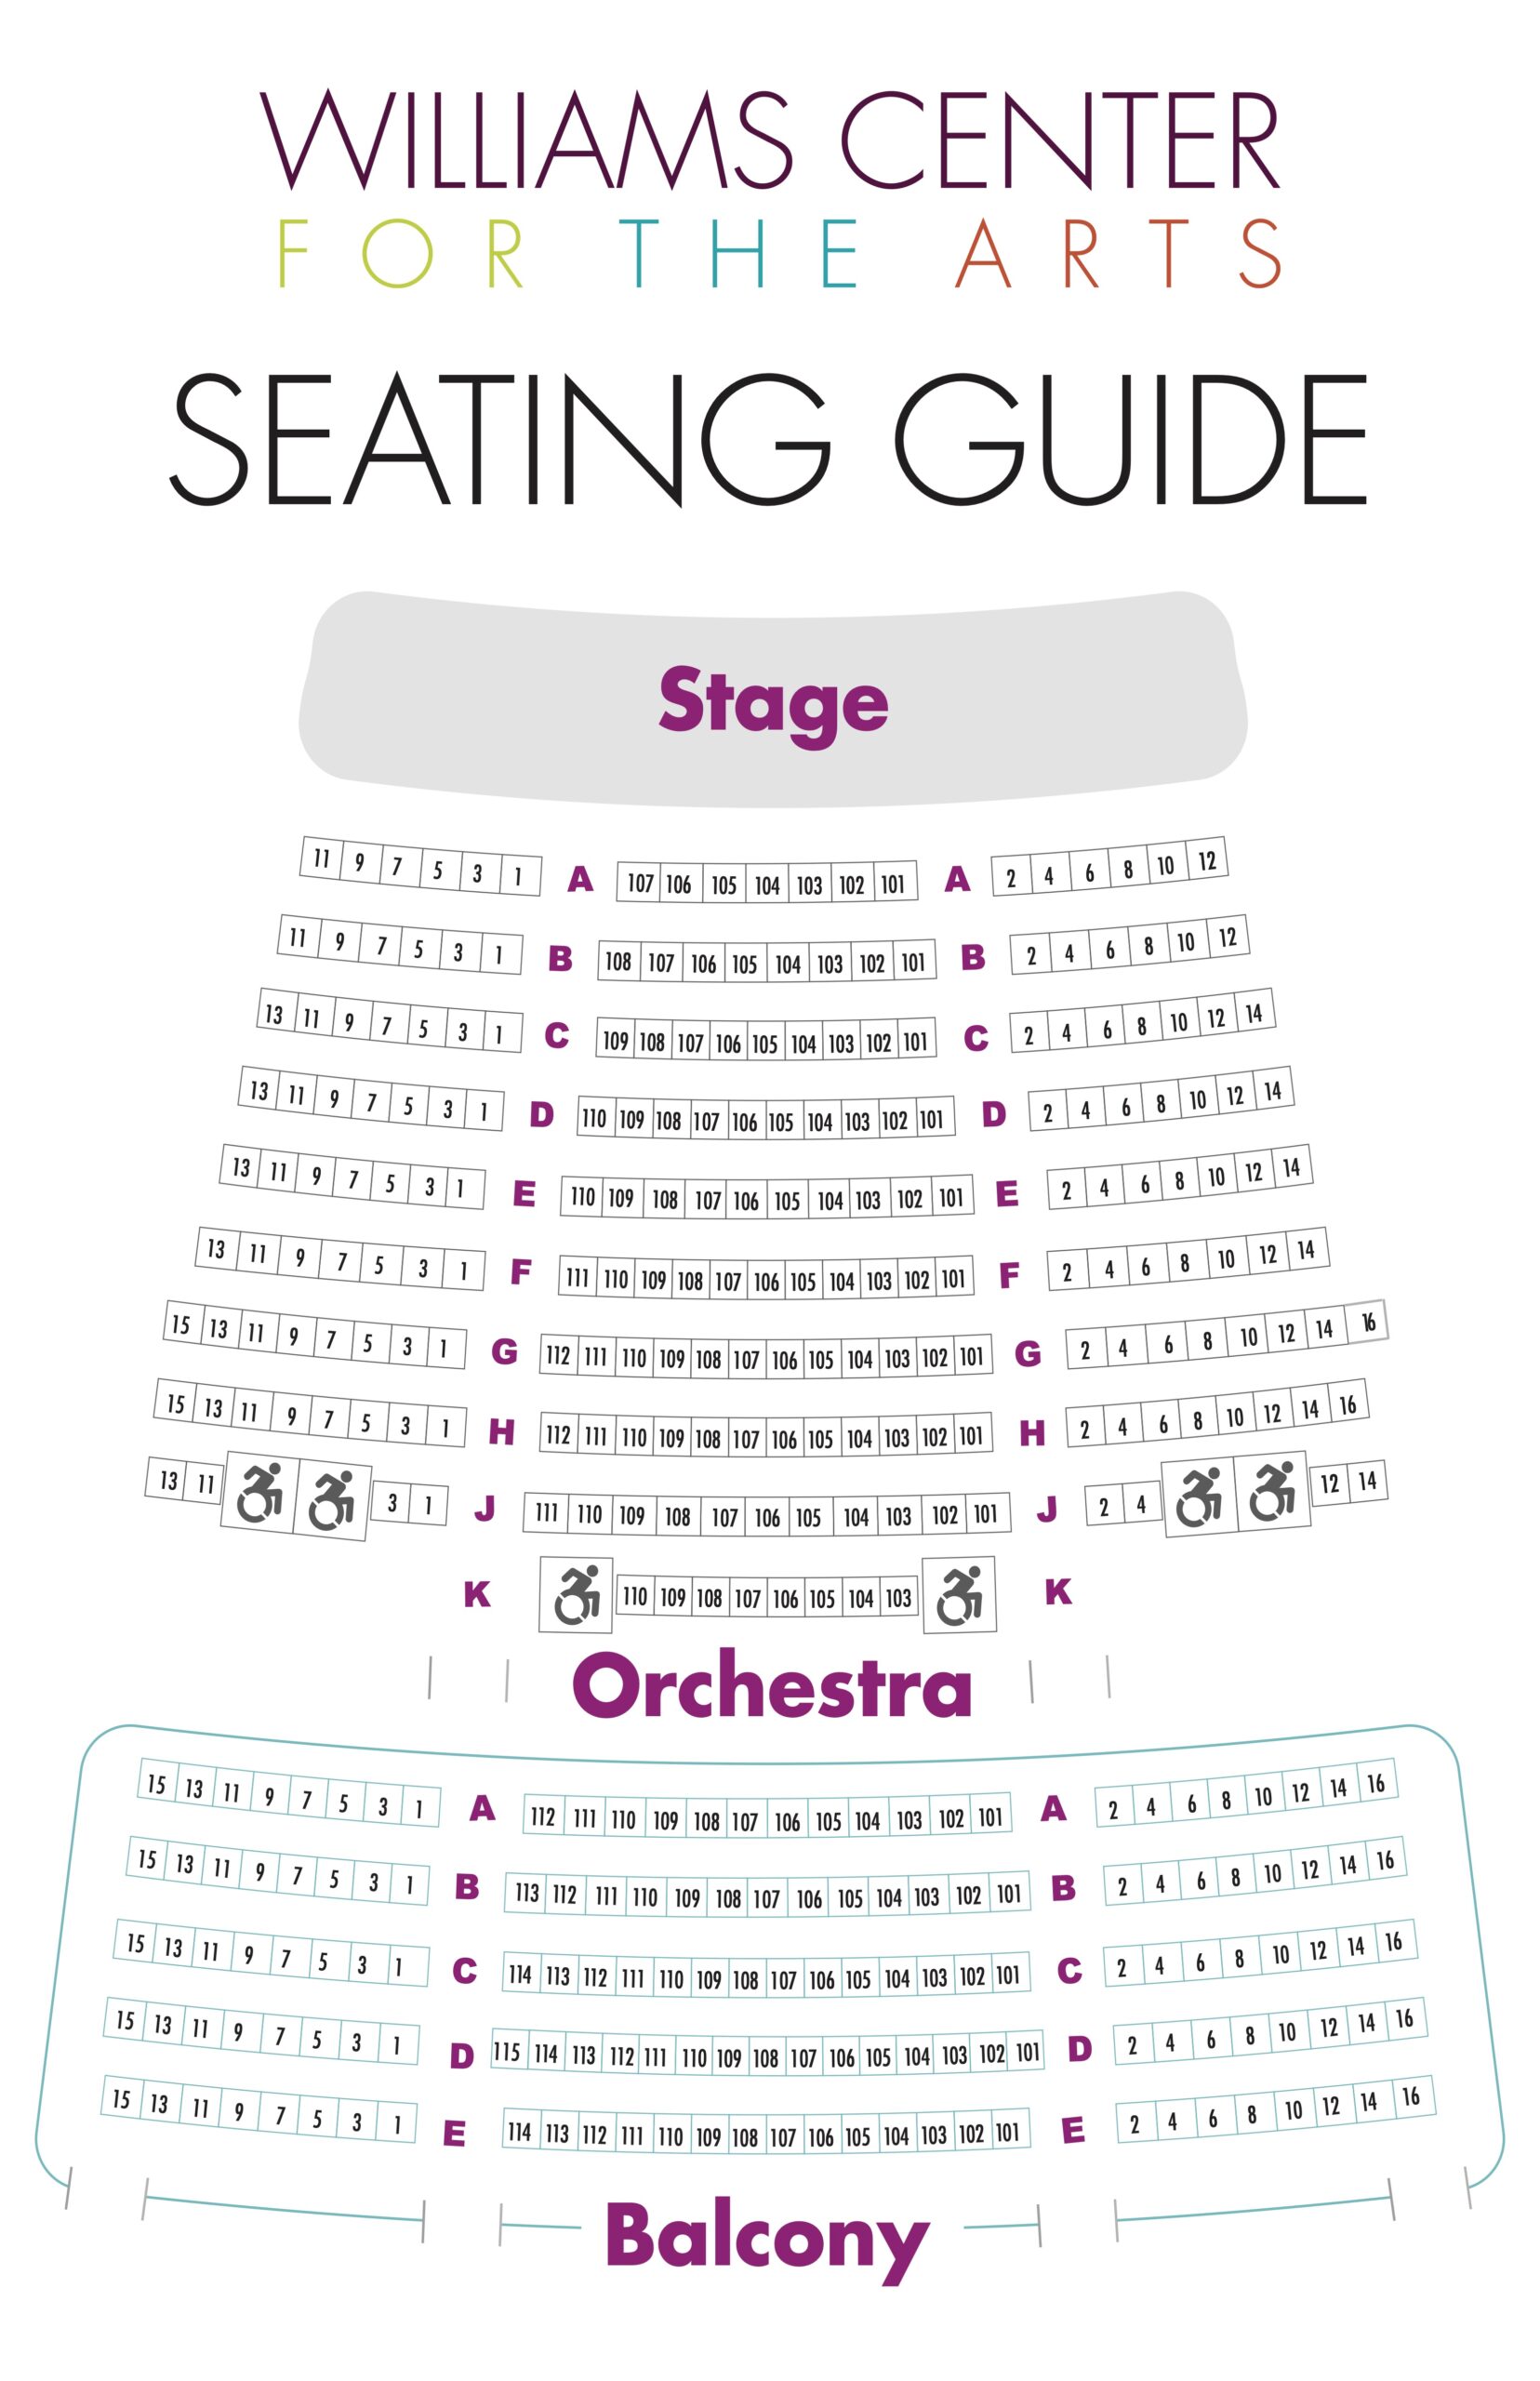 Williams Center for the Arts seating chart